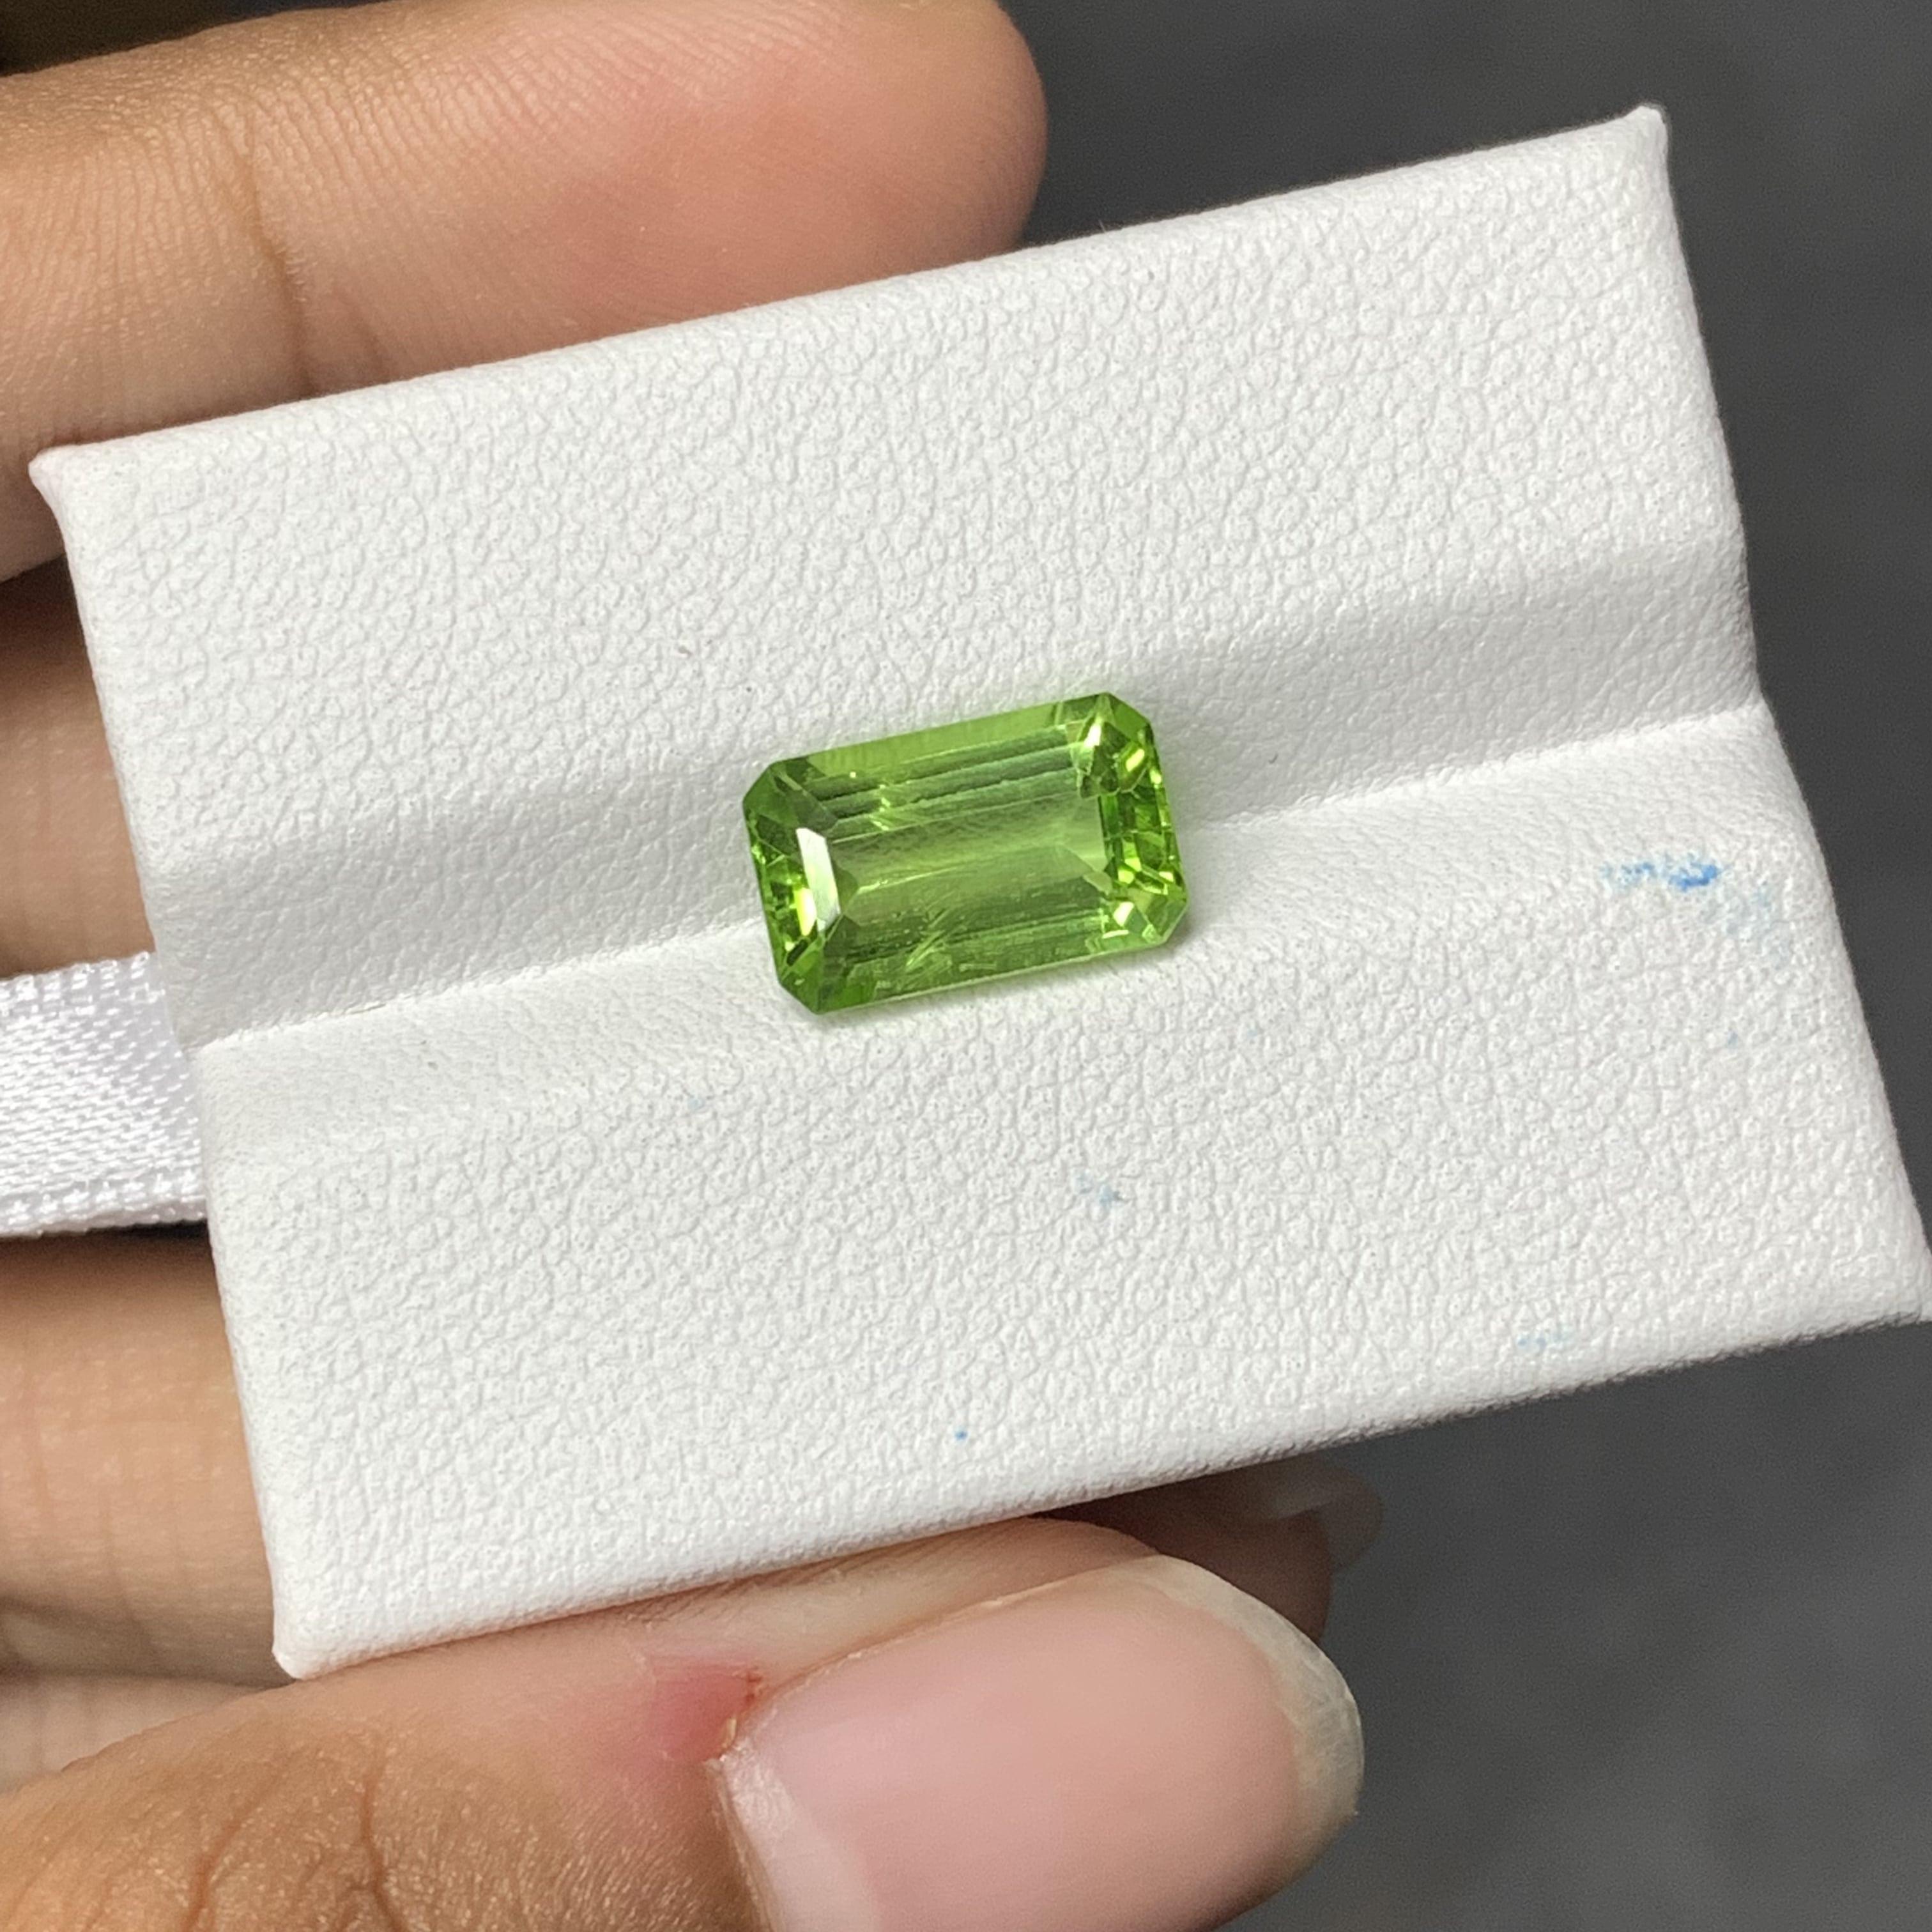 A mesmerizing, elongated emerald-cut  3.16 Carat Peridot stone that is a gorgeous shade of vivid green.  It is completely natural and of good quality. 

The measurements of the Peridot are 10.86 x 6.17 x 4.70 mm

If you wish to get a custom jewelry